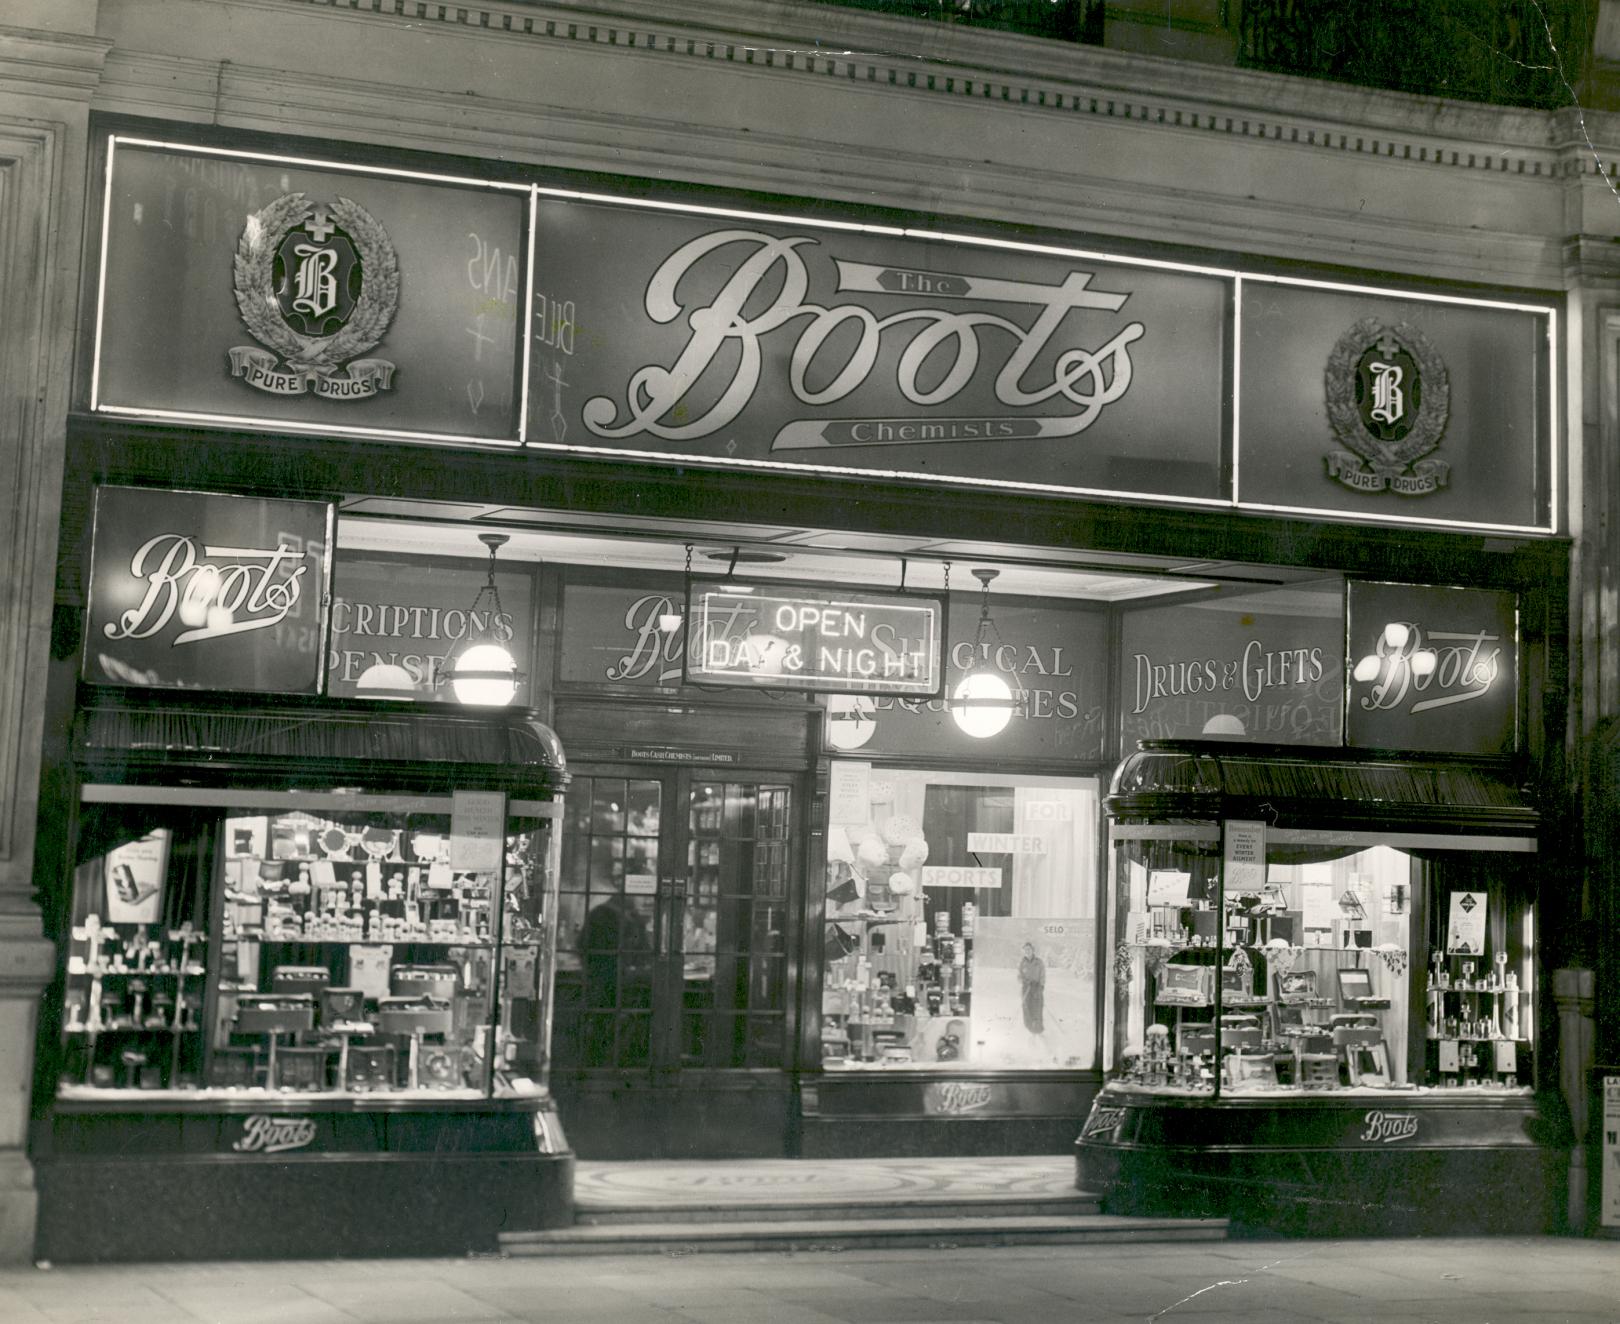 1849 - John Boot opens first Boots store, selling herbal remedies, in Goose Gate, Nottingham, UK